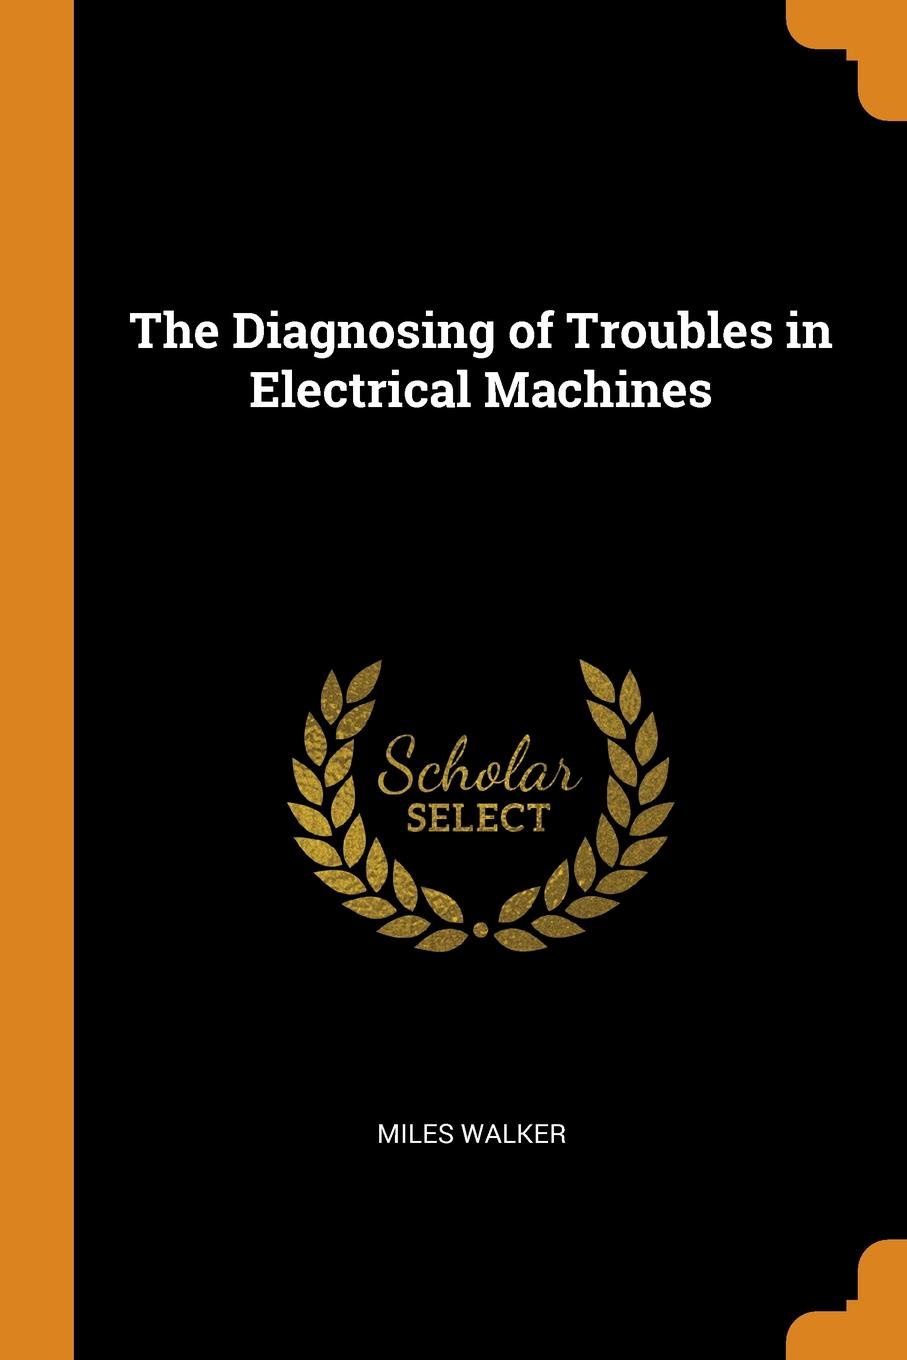 The Diagnosing of Troubles in Electrical Machines